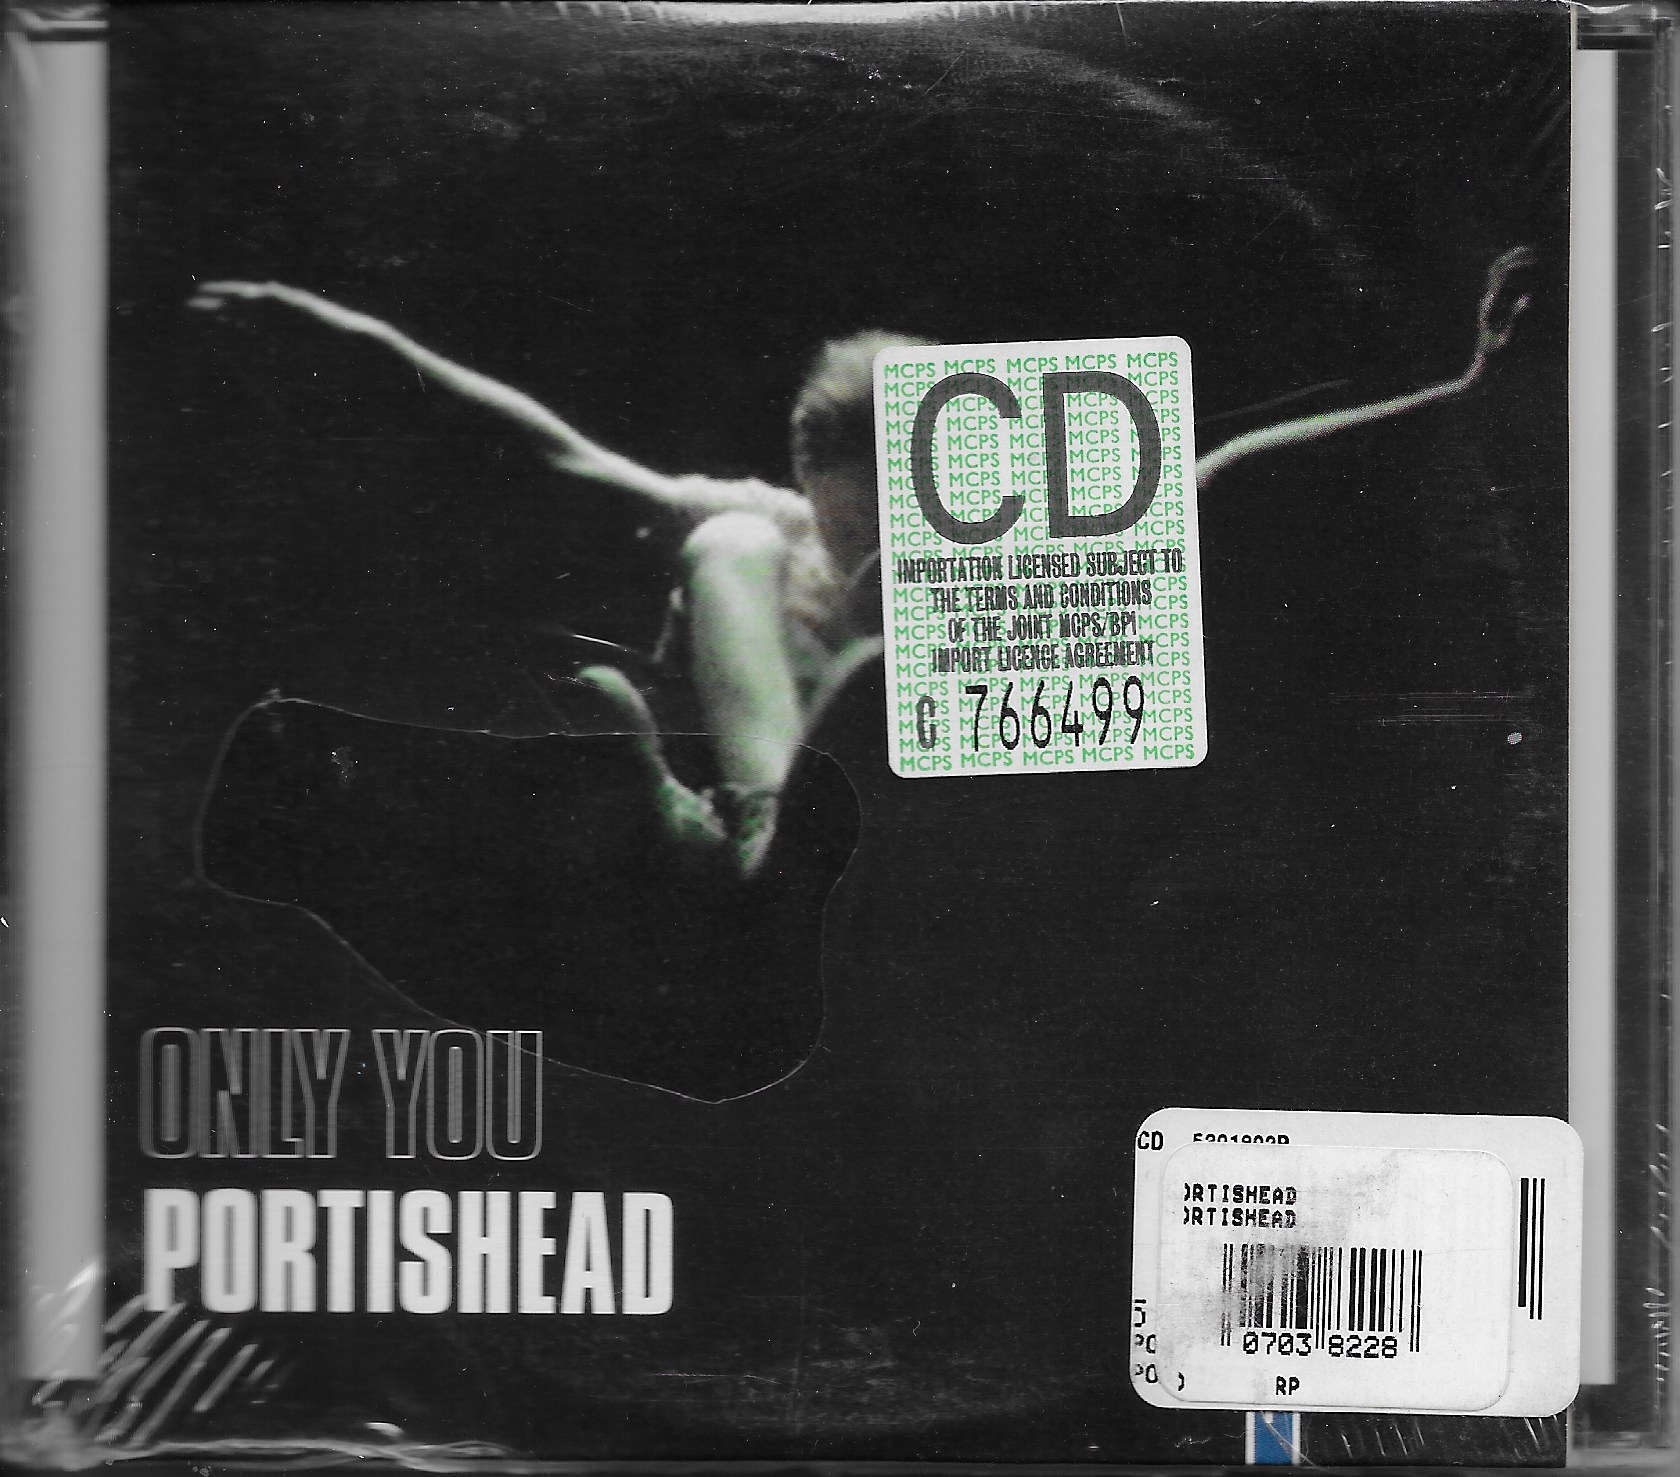 Picture of 539189 - 2 I Portishead by artist Portishead 